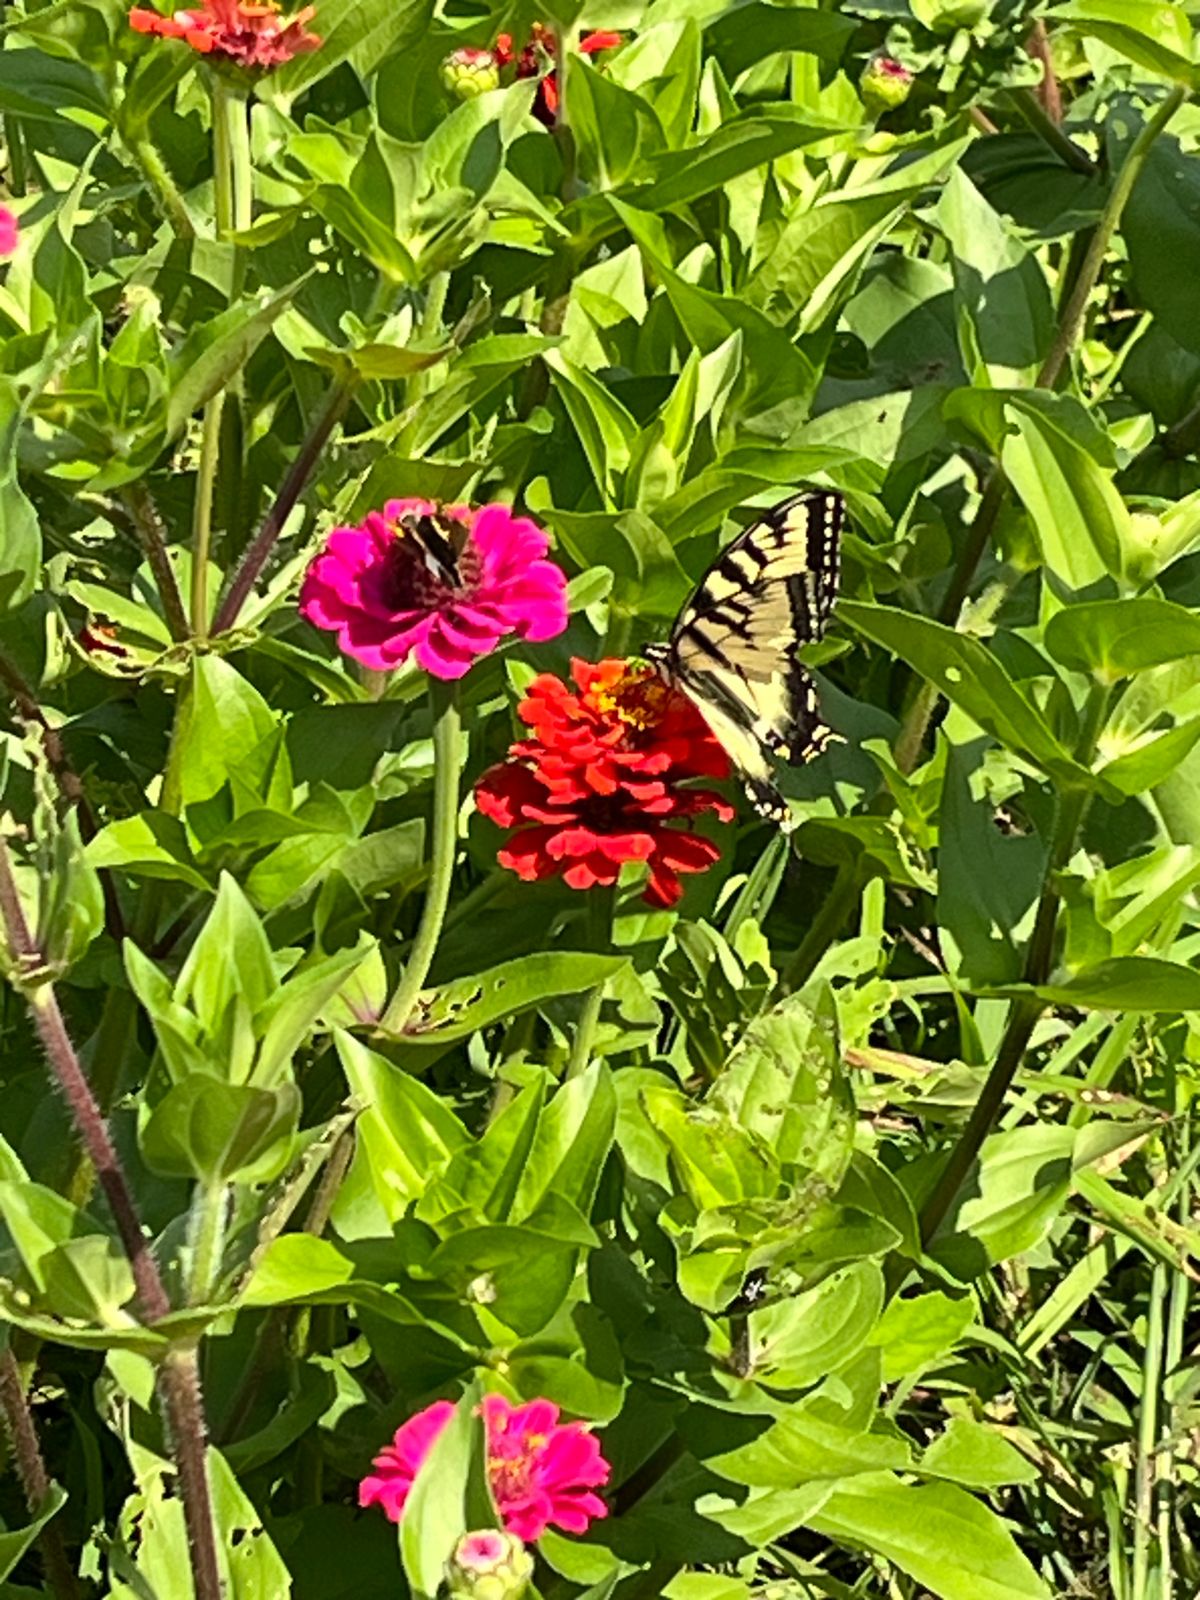 Two different butterfly species on zinnia flowers